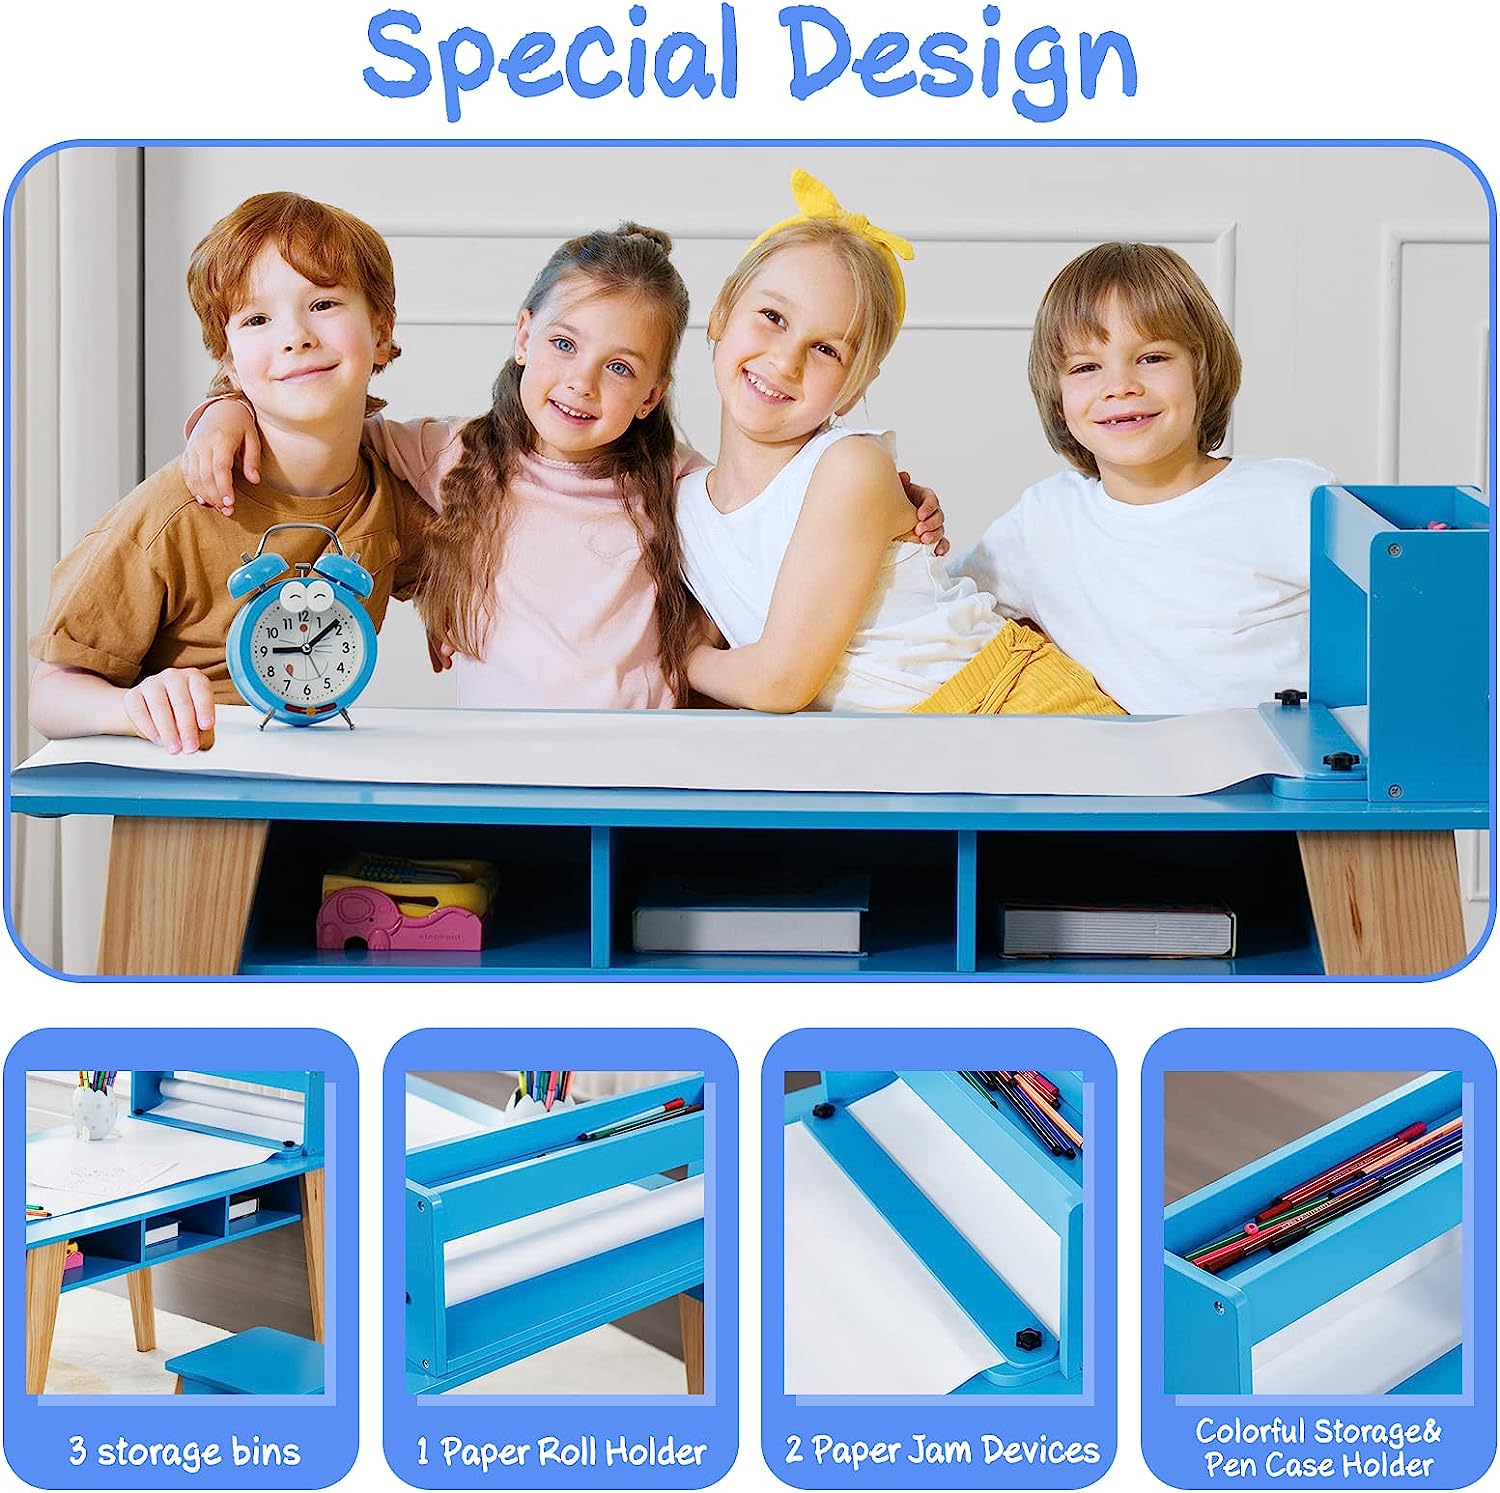 Buy Arts and Crafts for Kids Activity Set with Playboard and